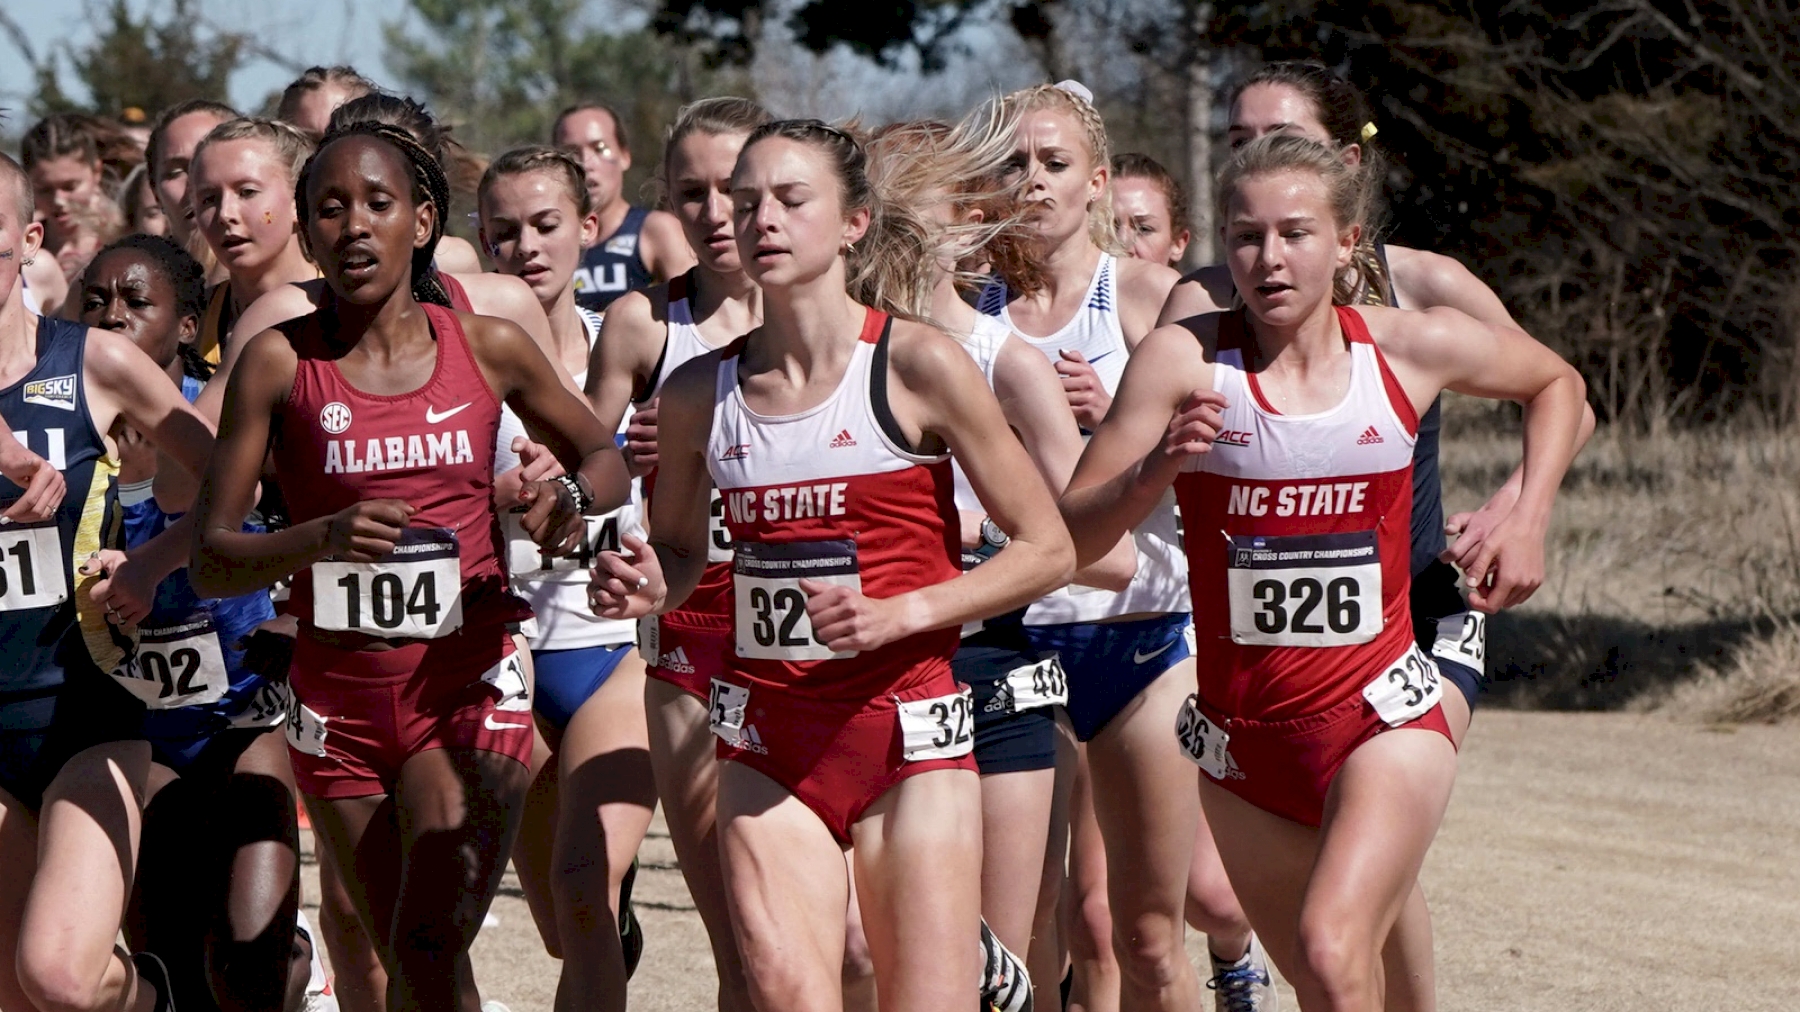 2022 DI NCAA XC Championships Track and Field Event FloTrack